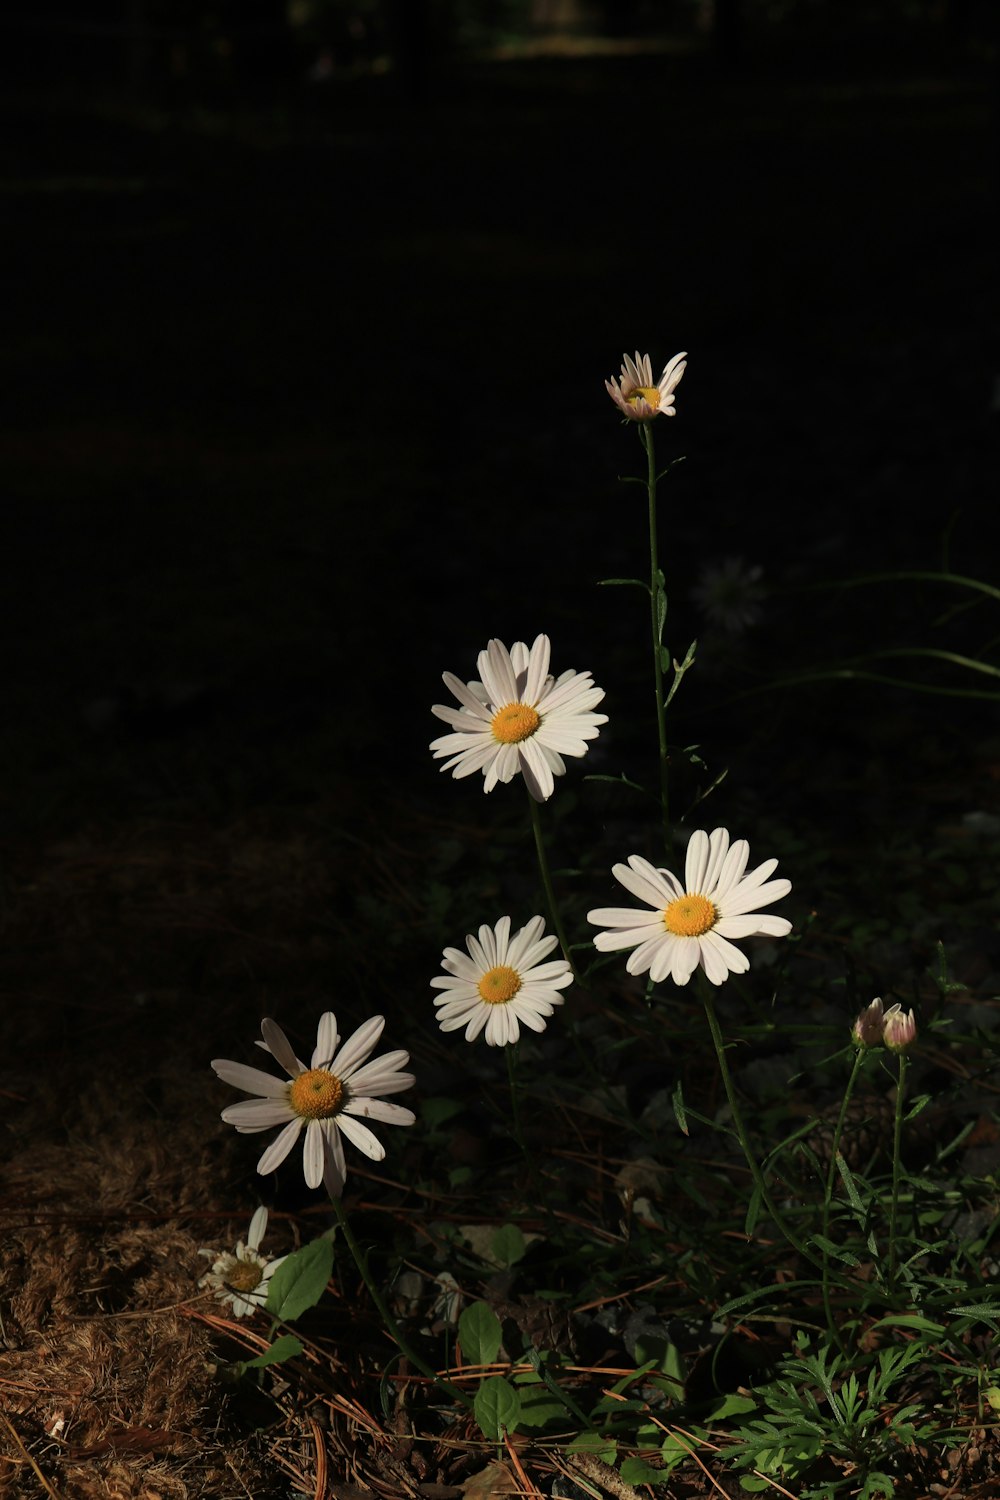 a group of daisies in a field at night